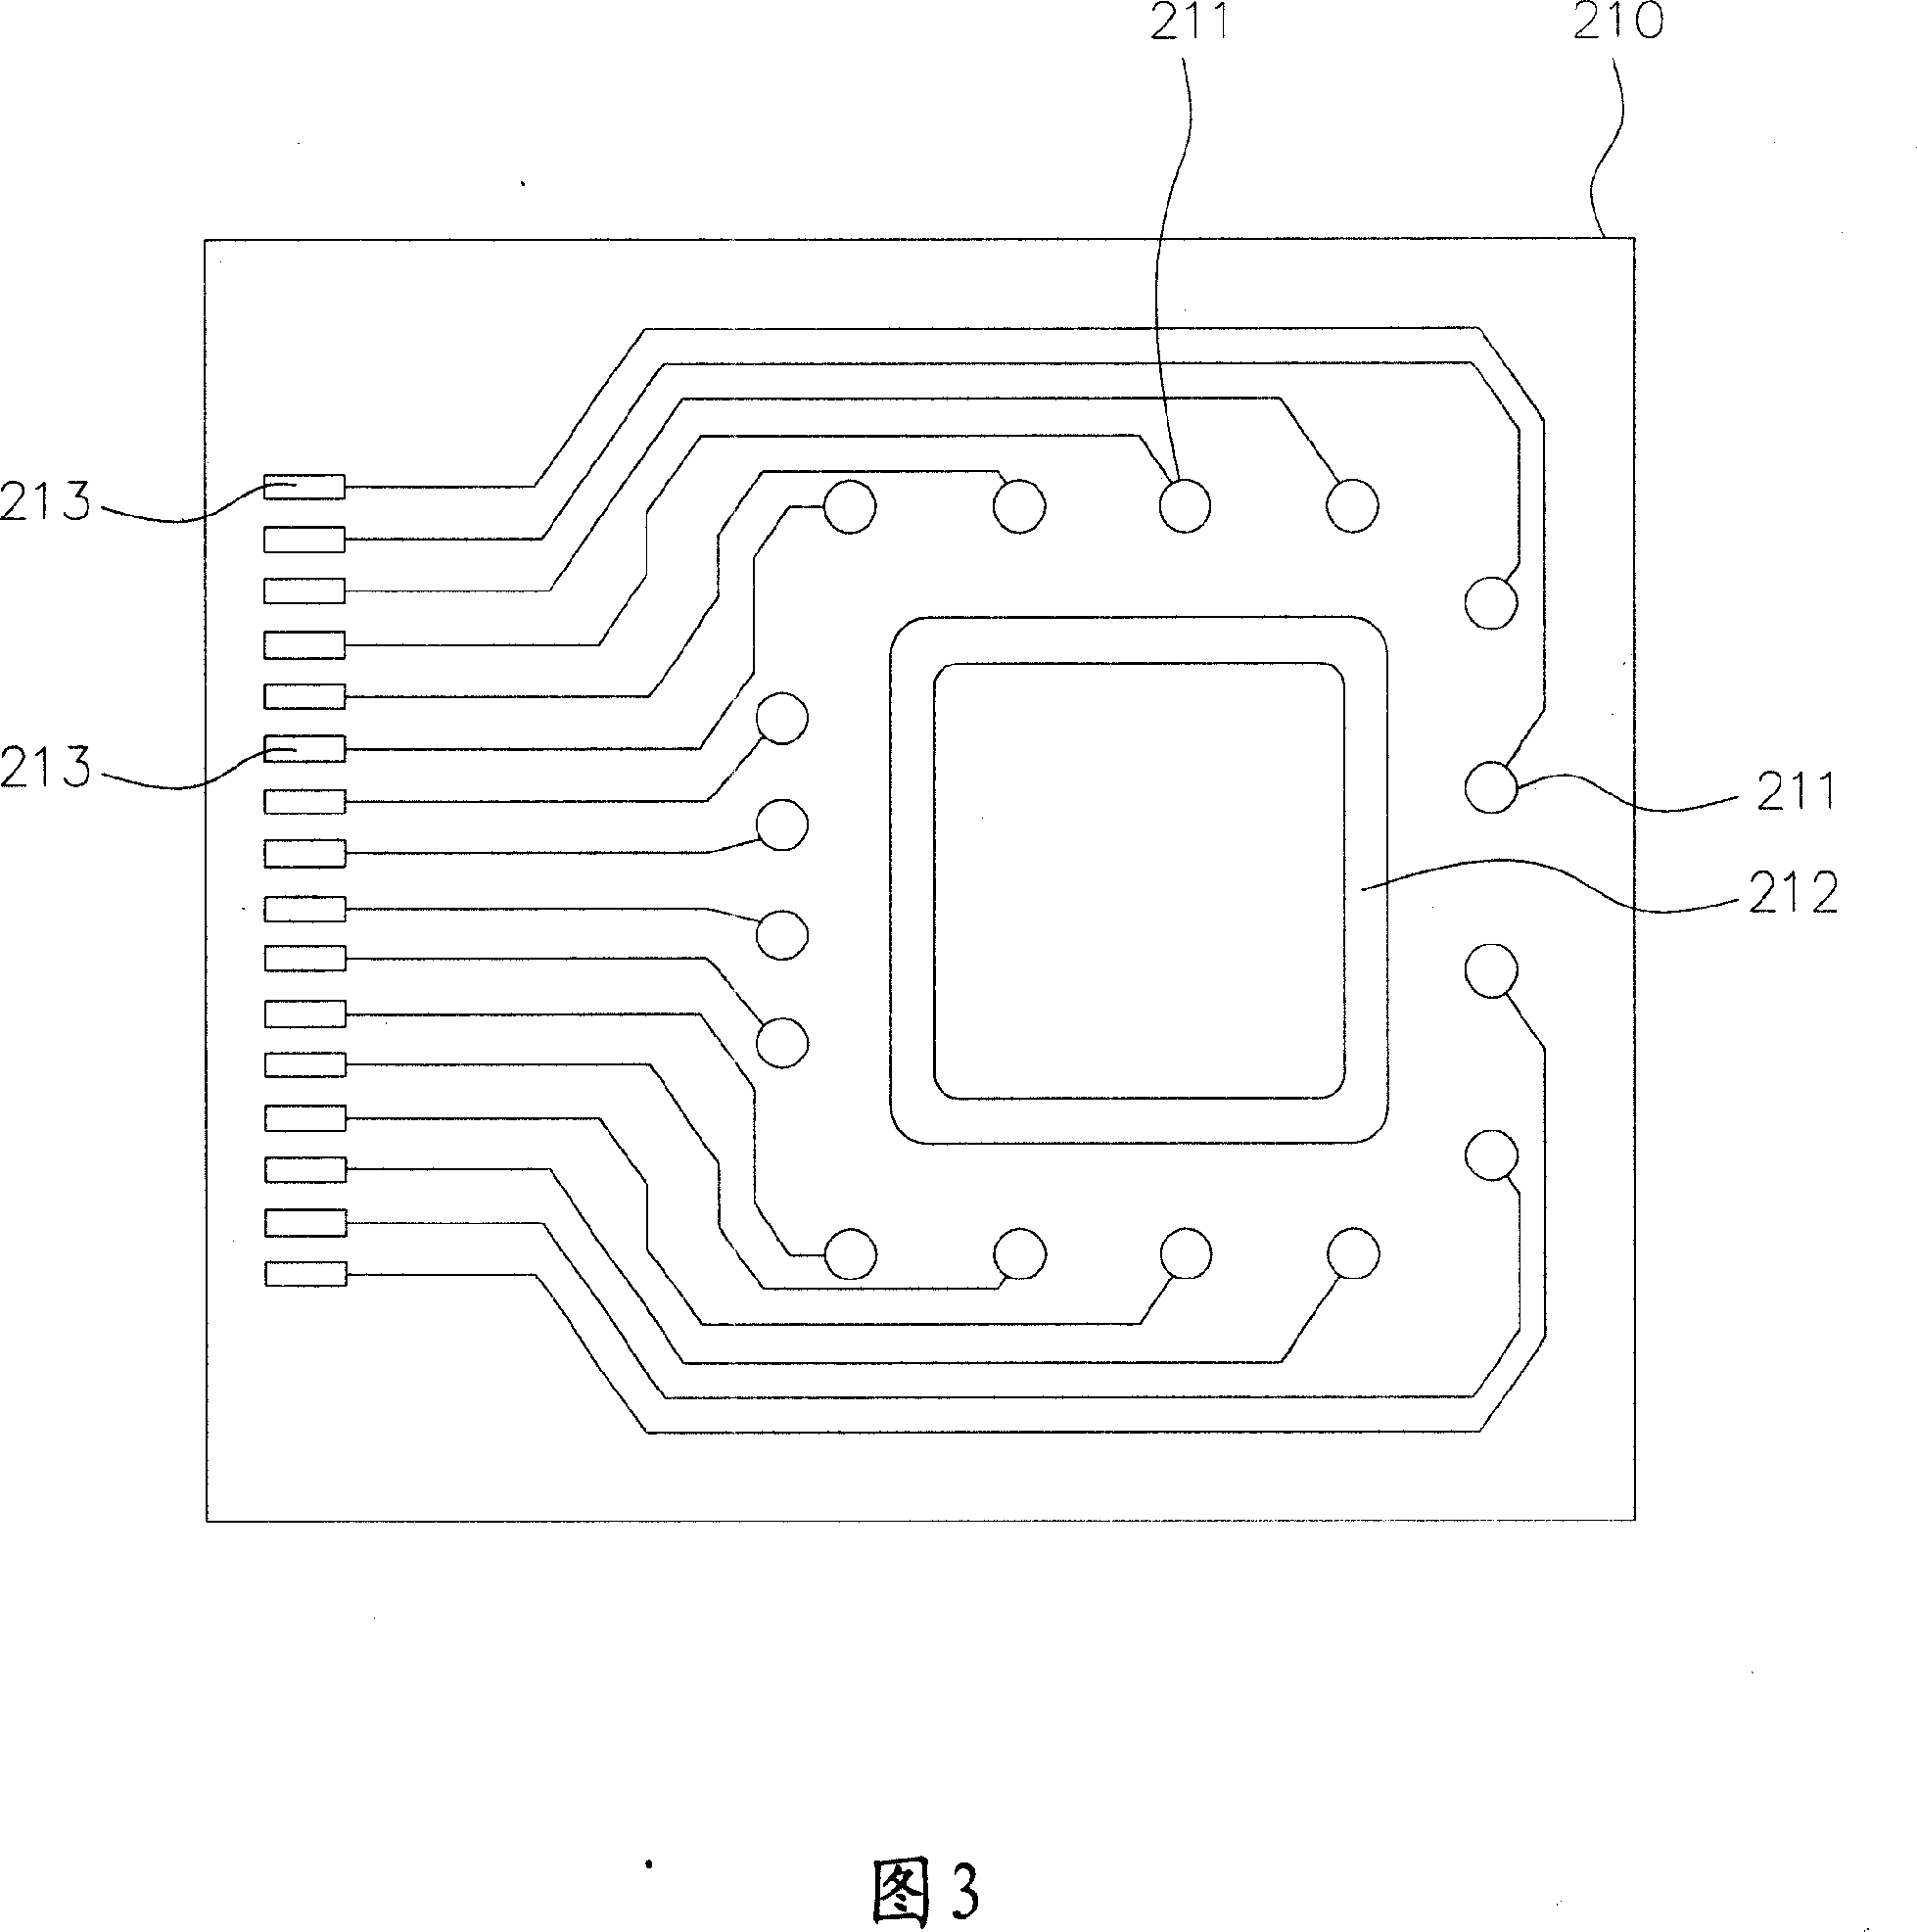 Glass crystal packaging structure for image sensory element